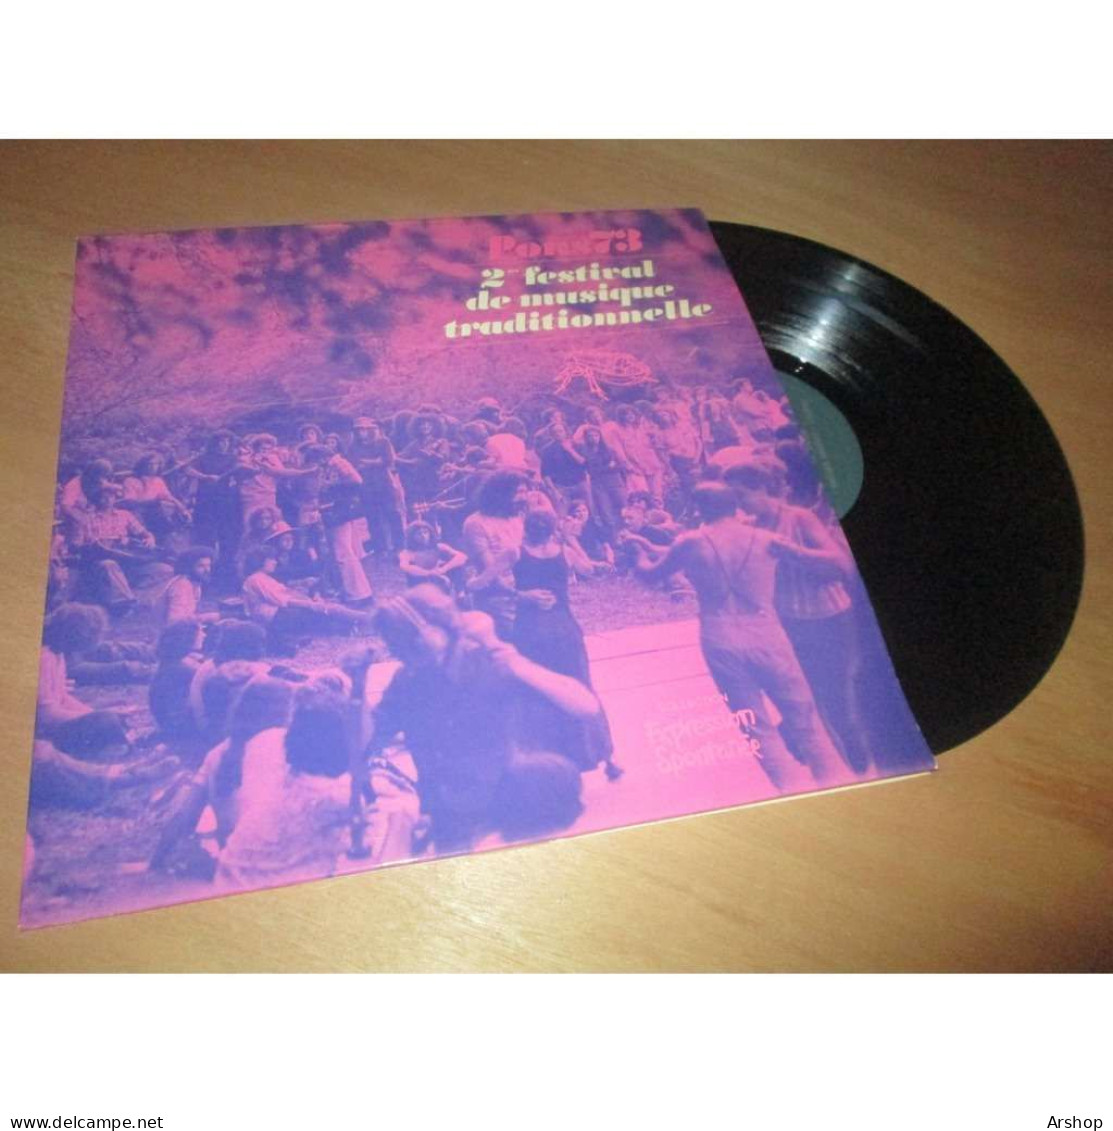 CLAUDE LEFEBVRE / PHIL FROMONT / ROGER SIFFER & Pons 73 FESTIVAL FOLK - EXPRESSION SPONTANEE N°13 - 1973 - Country & Folk